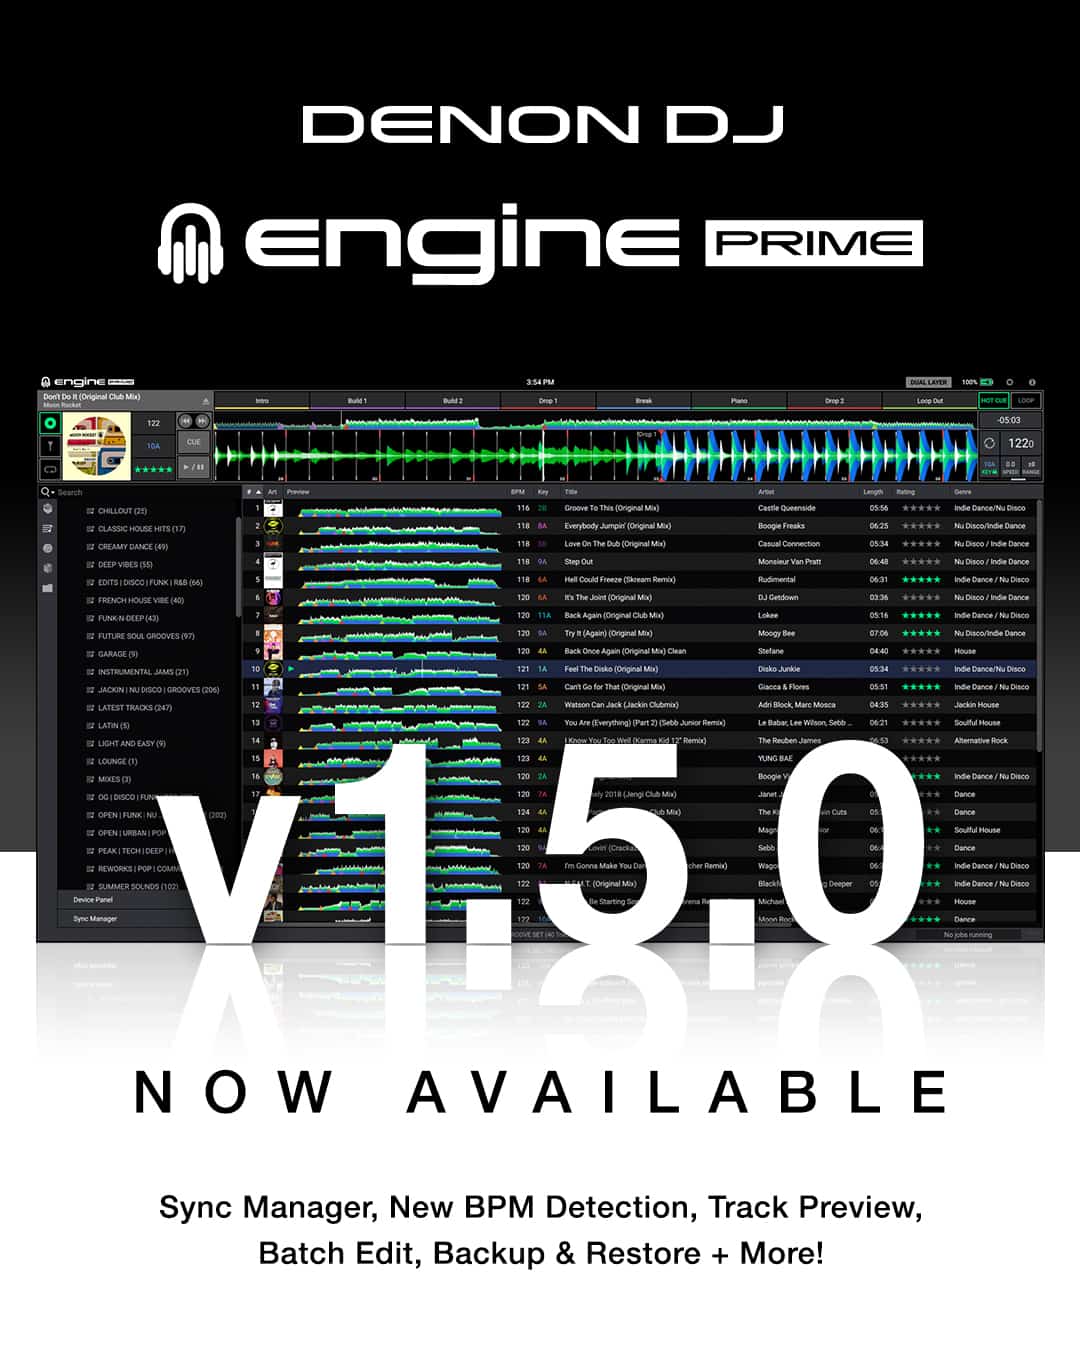 Engine PRIME v1.5 Software Update | Sync Manager, New BPM Detection, Track Preview + More